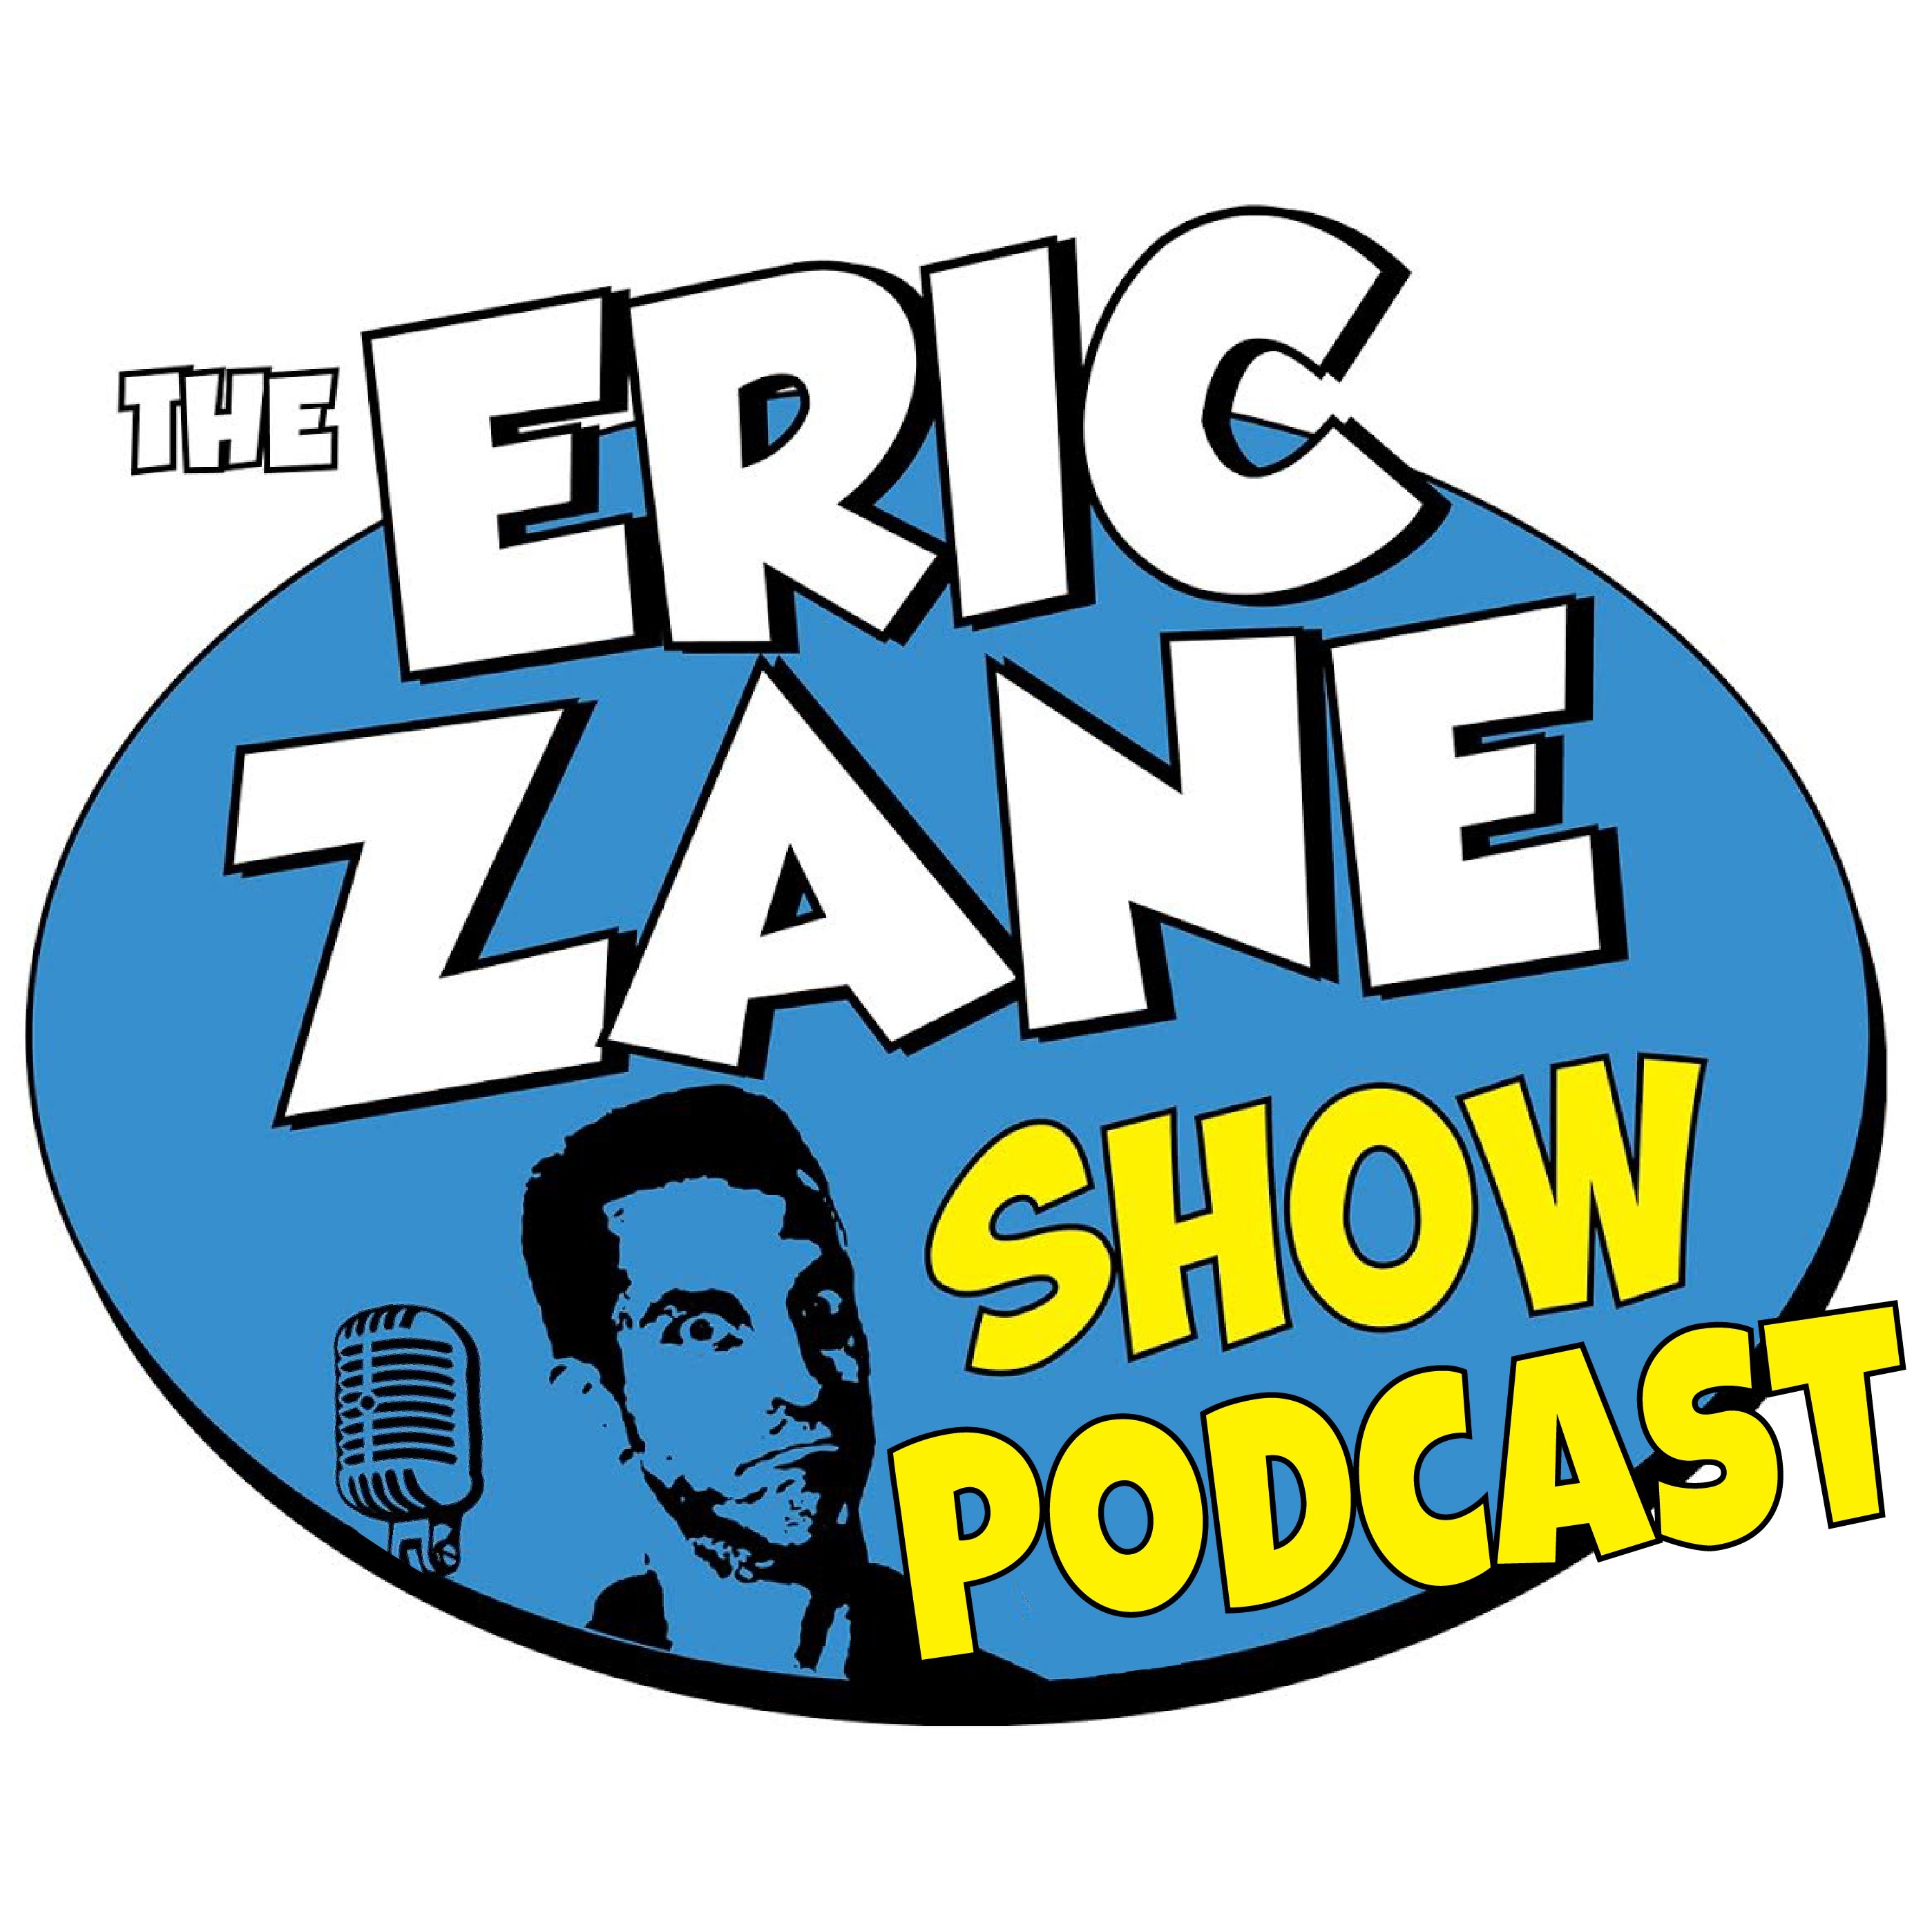 Eric Zane Show Podcast 904 More trouble for Adam Levine / Dildos on the road